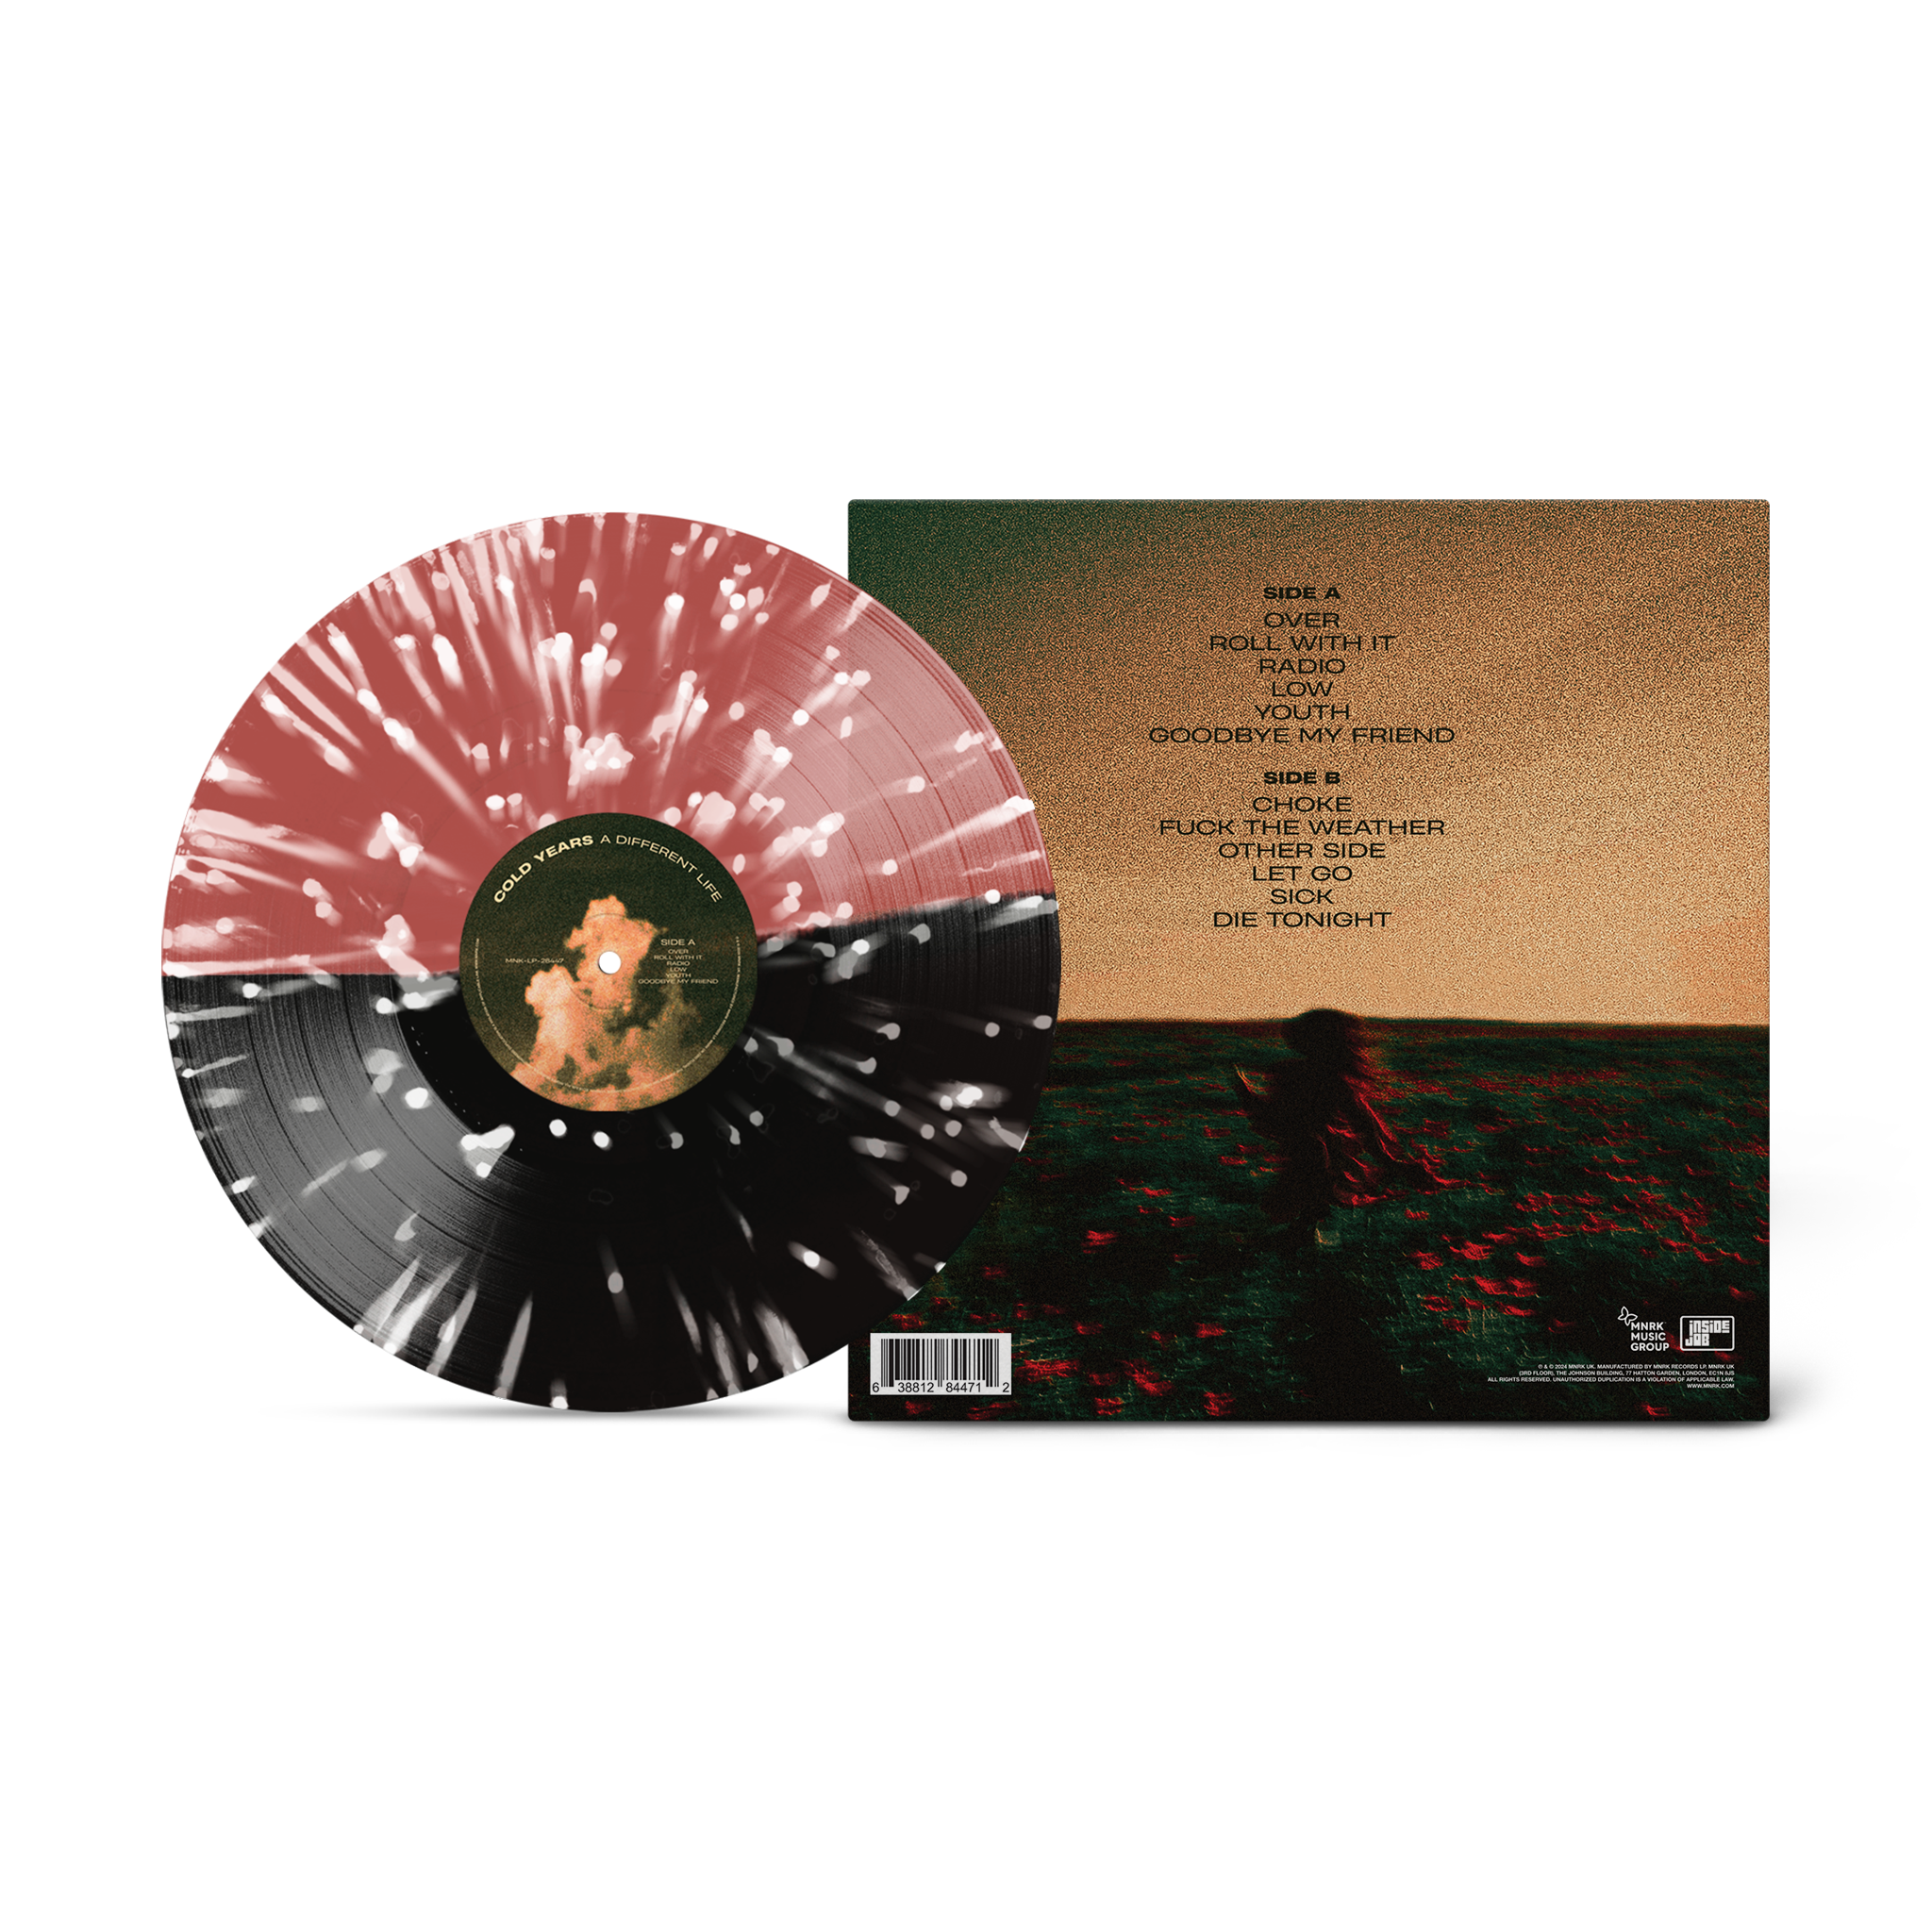 Cold Years - A Different Life Splatter Vinyl